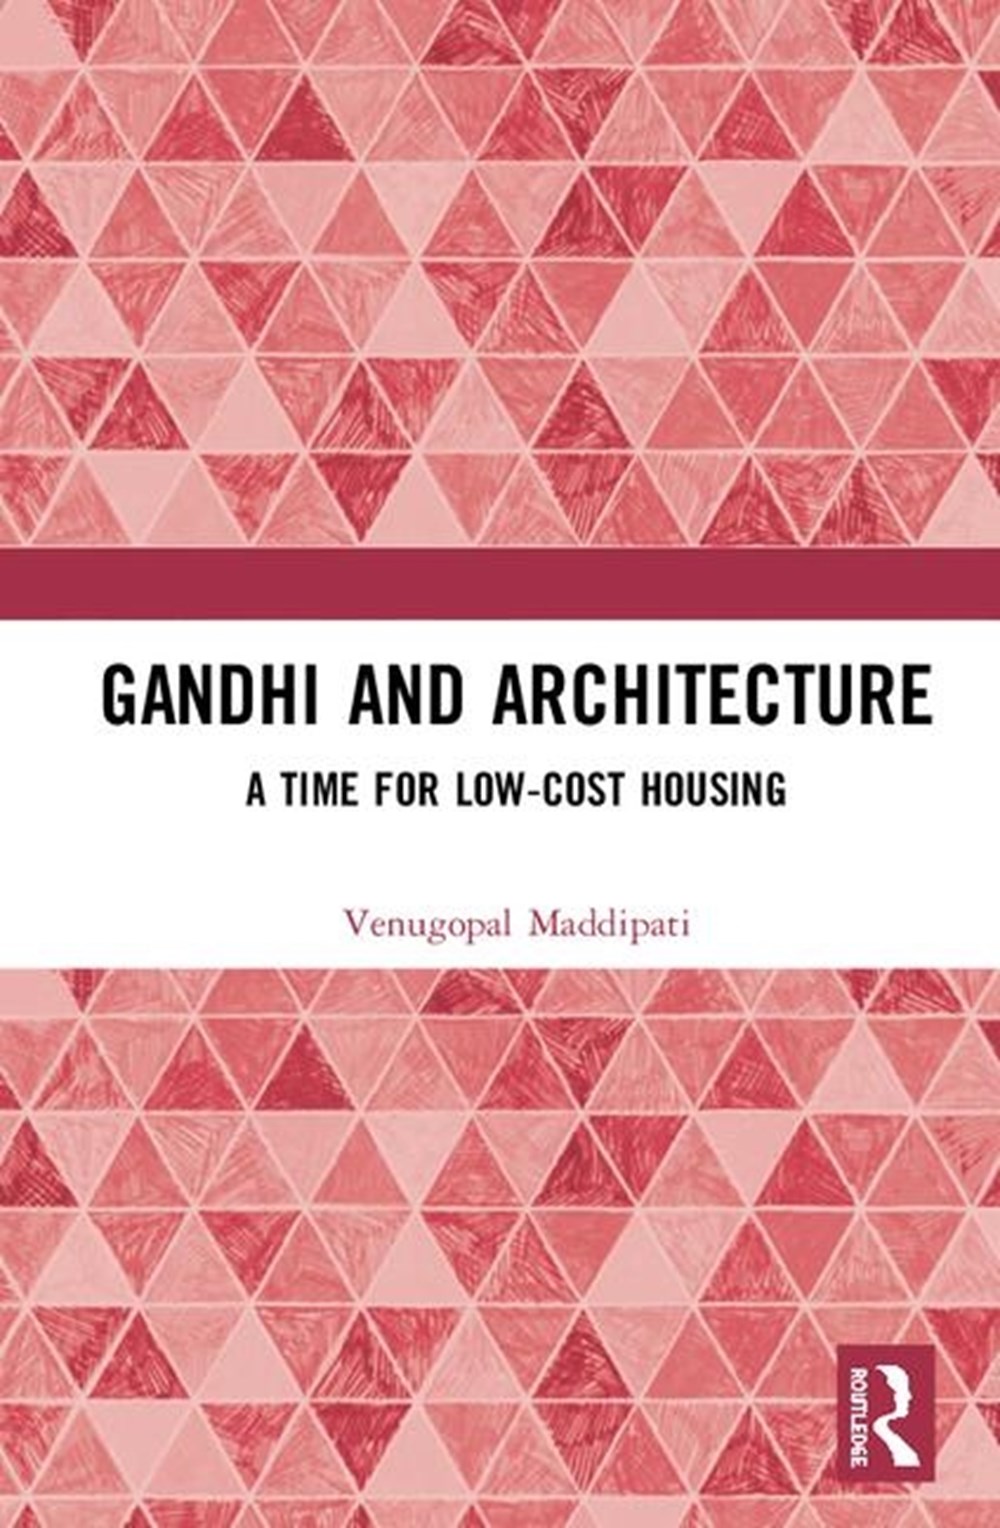 Gandhi and Architecture: A Time for Low-Cost Housing